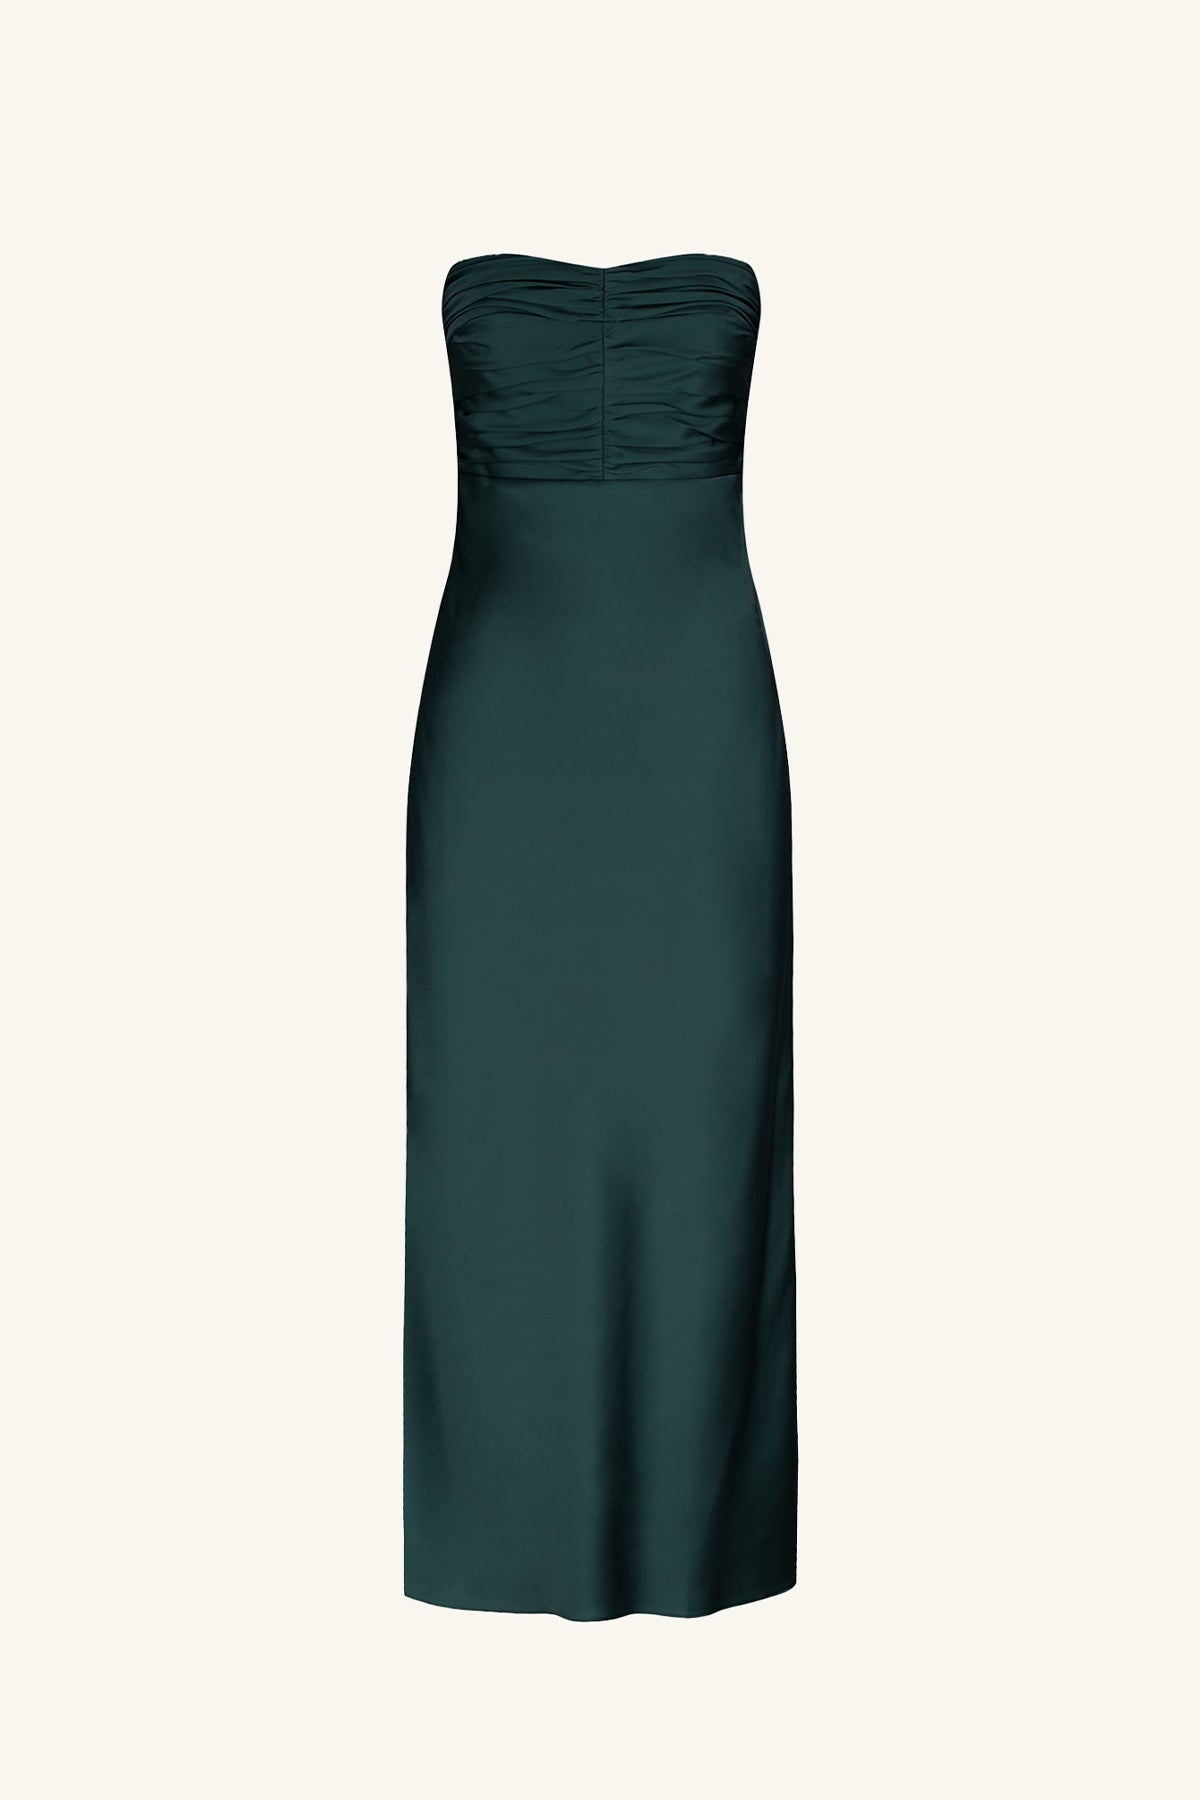 Luxe Strapless Ruched Bodice Midi Dress, Eucalyptus